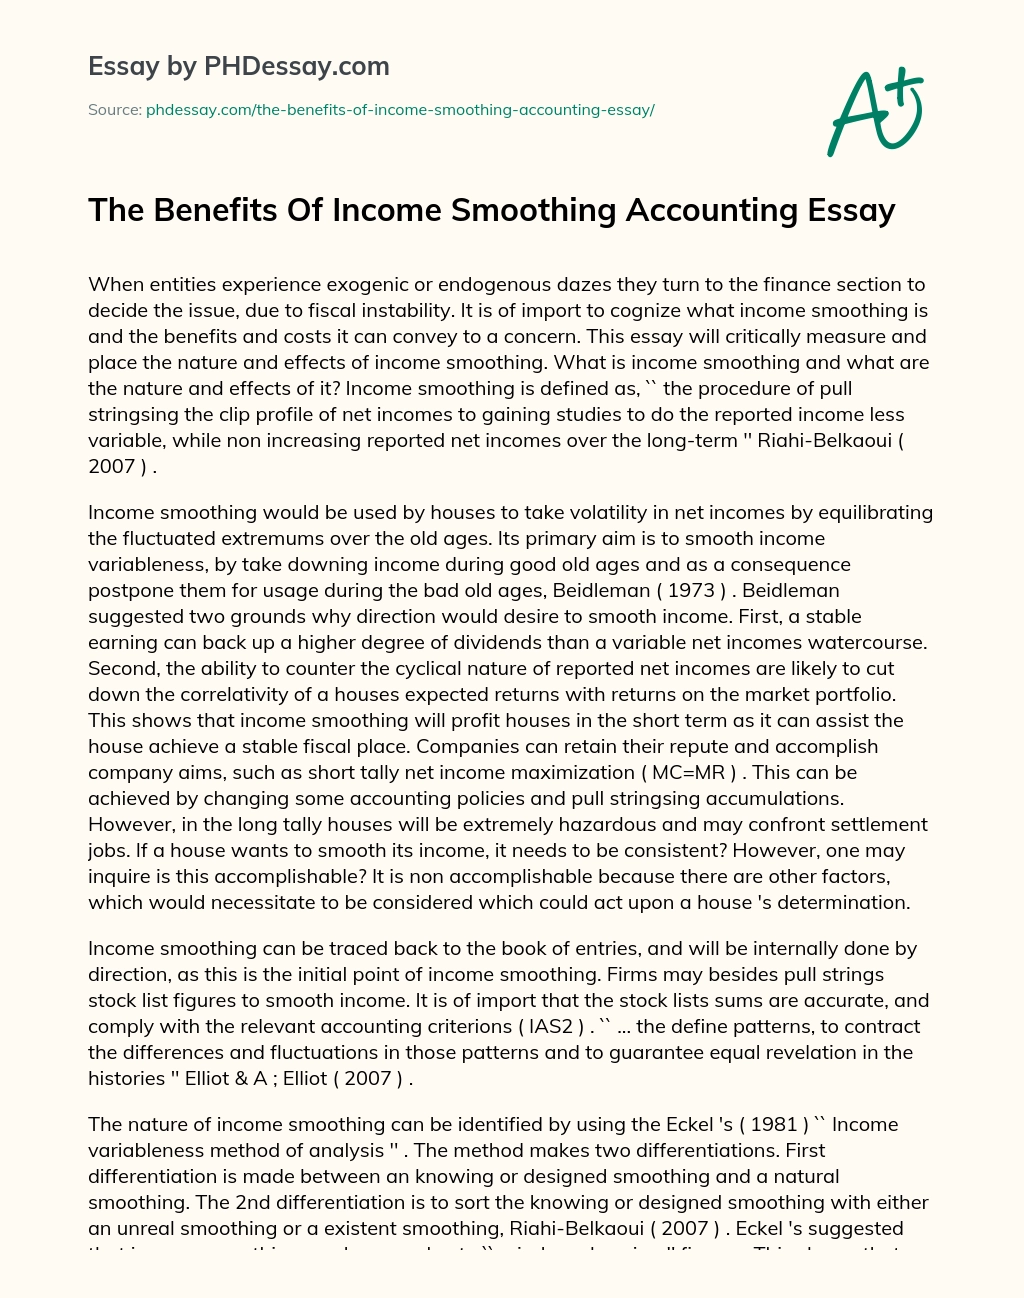 The Benefits Of Income Smoothing Accounting Essay essay